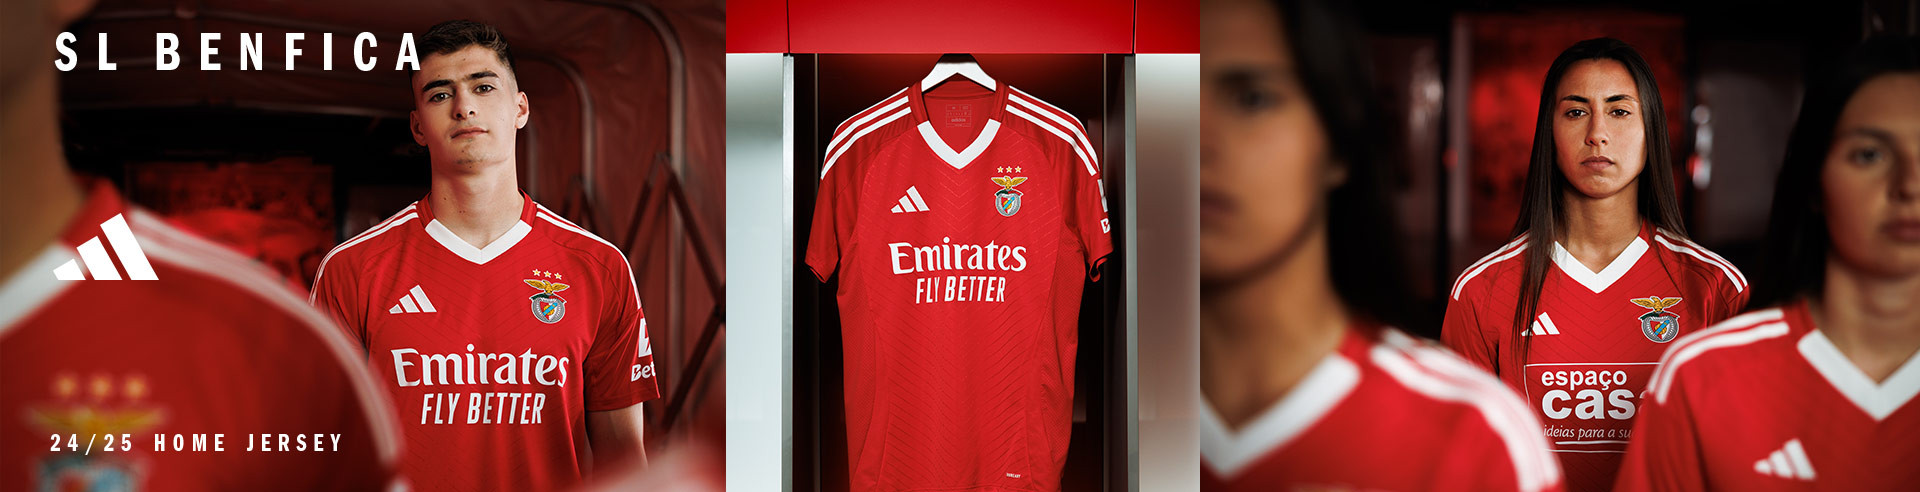 adidas sl benfica new home kit 24 25 all